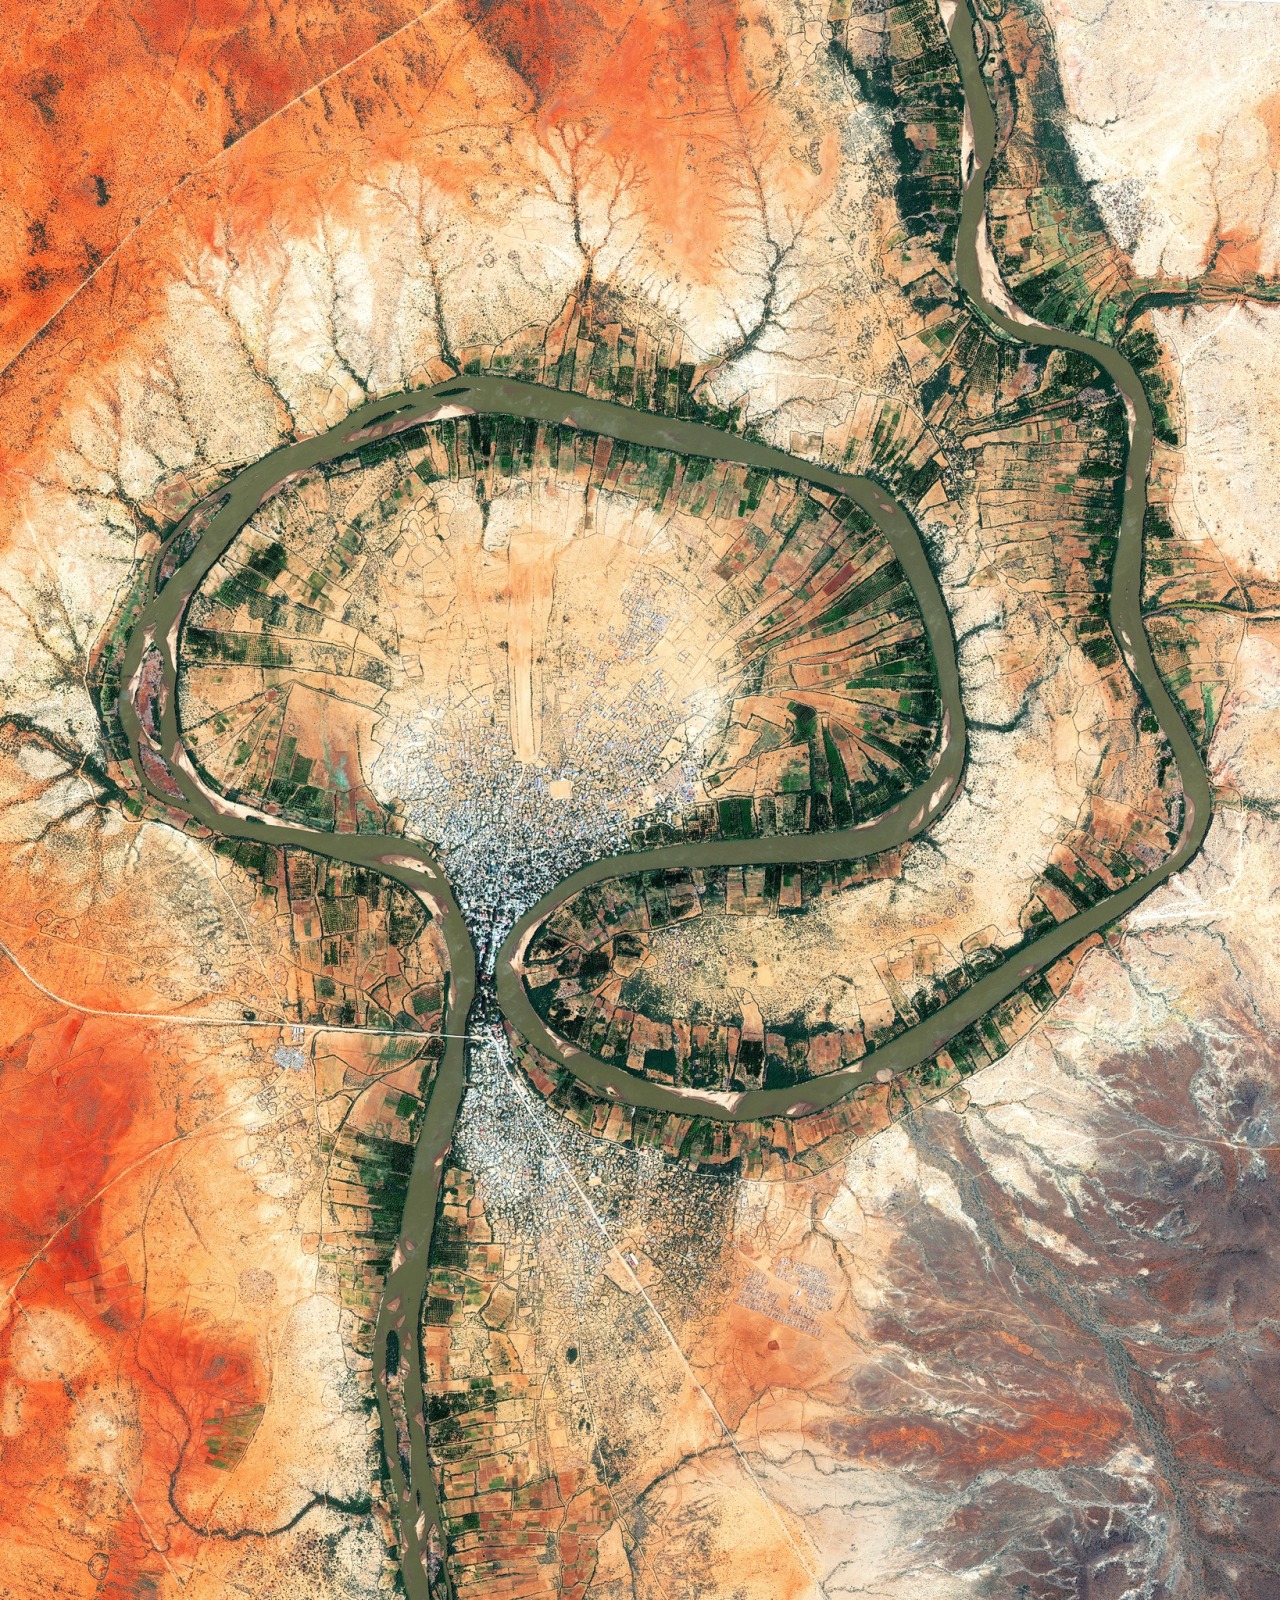 Porn photo dailyoverview:Luuq, Somalia, is located in